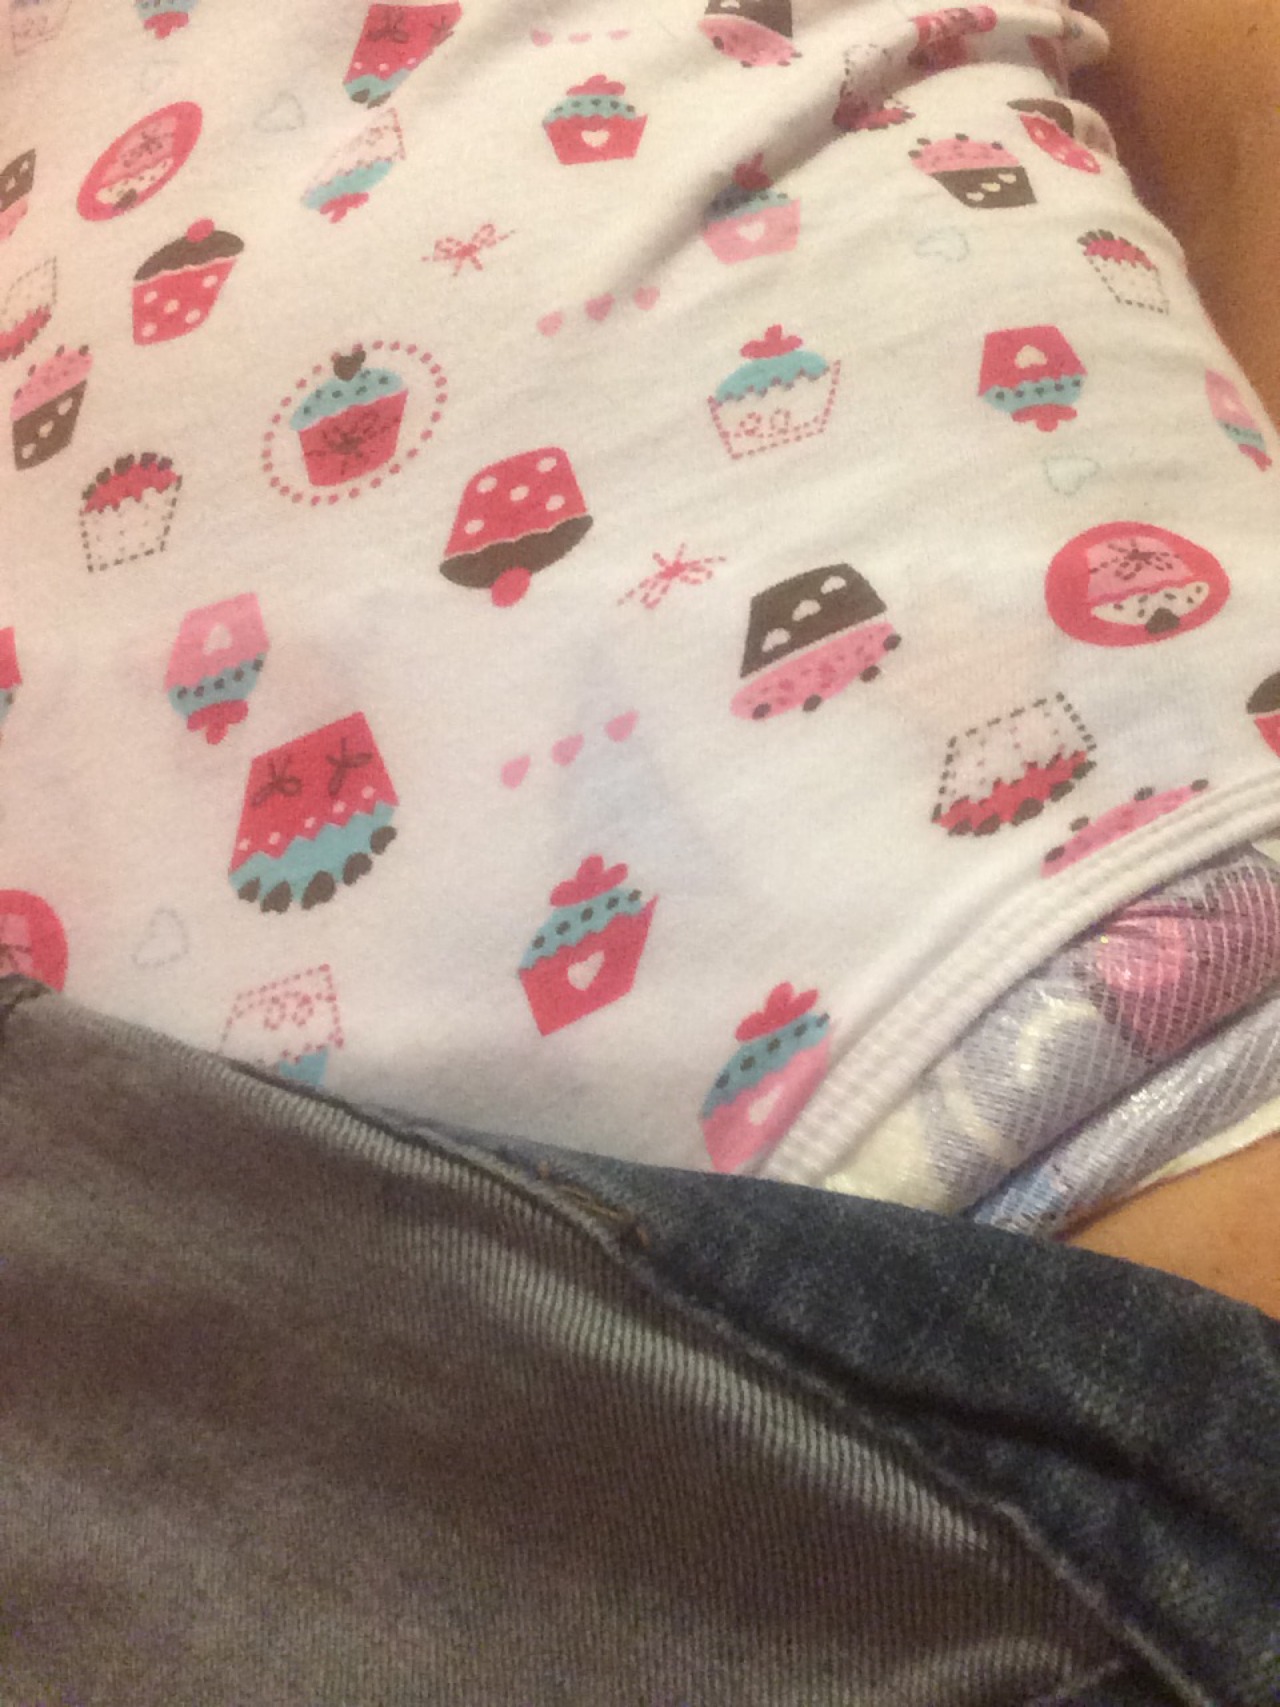 daddyslittledear:  daddydoc:  Think anyone will know I’m wearing a dip and onesie